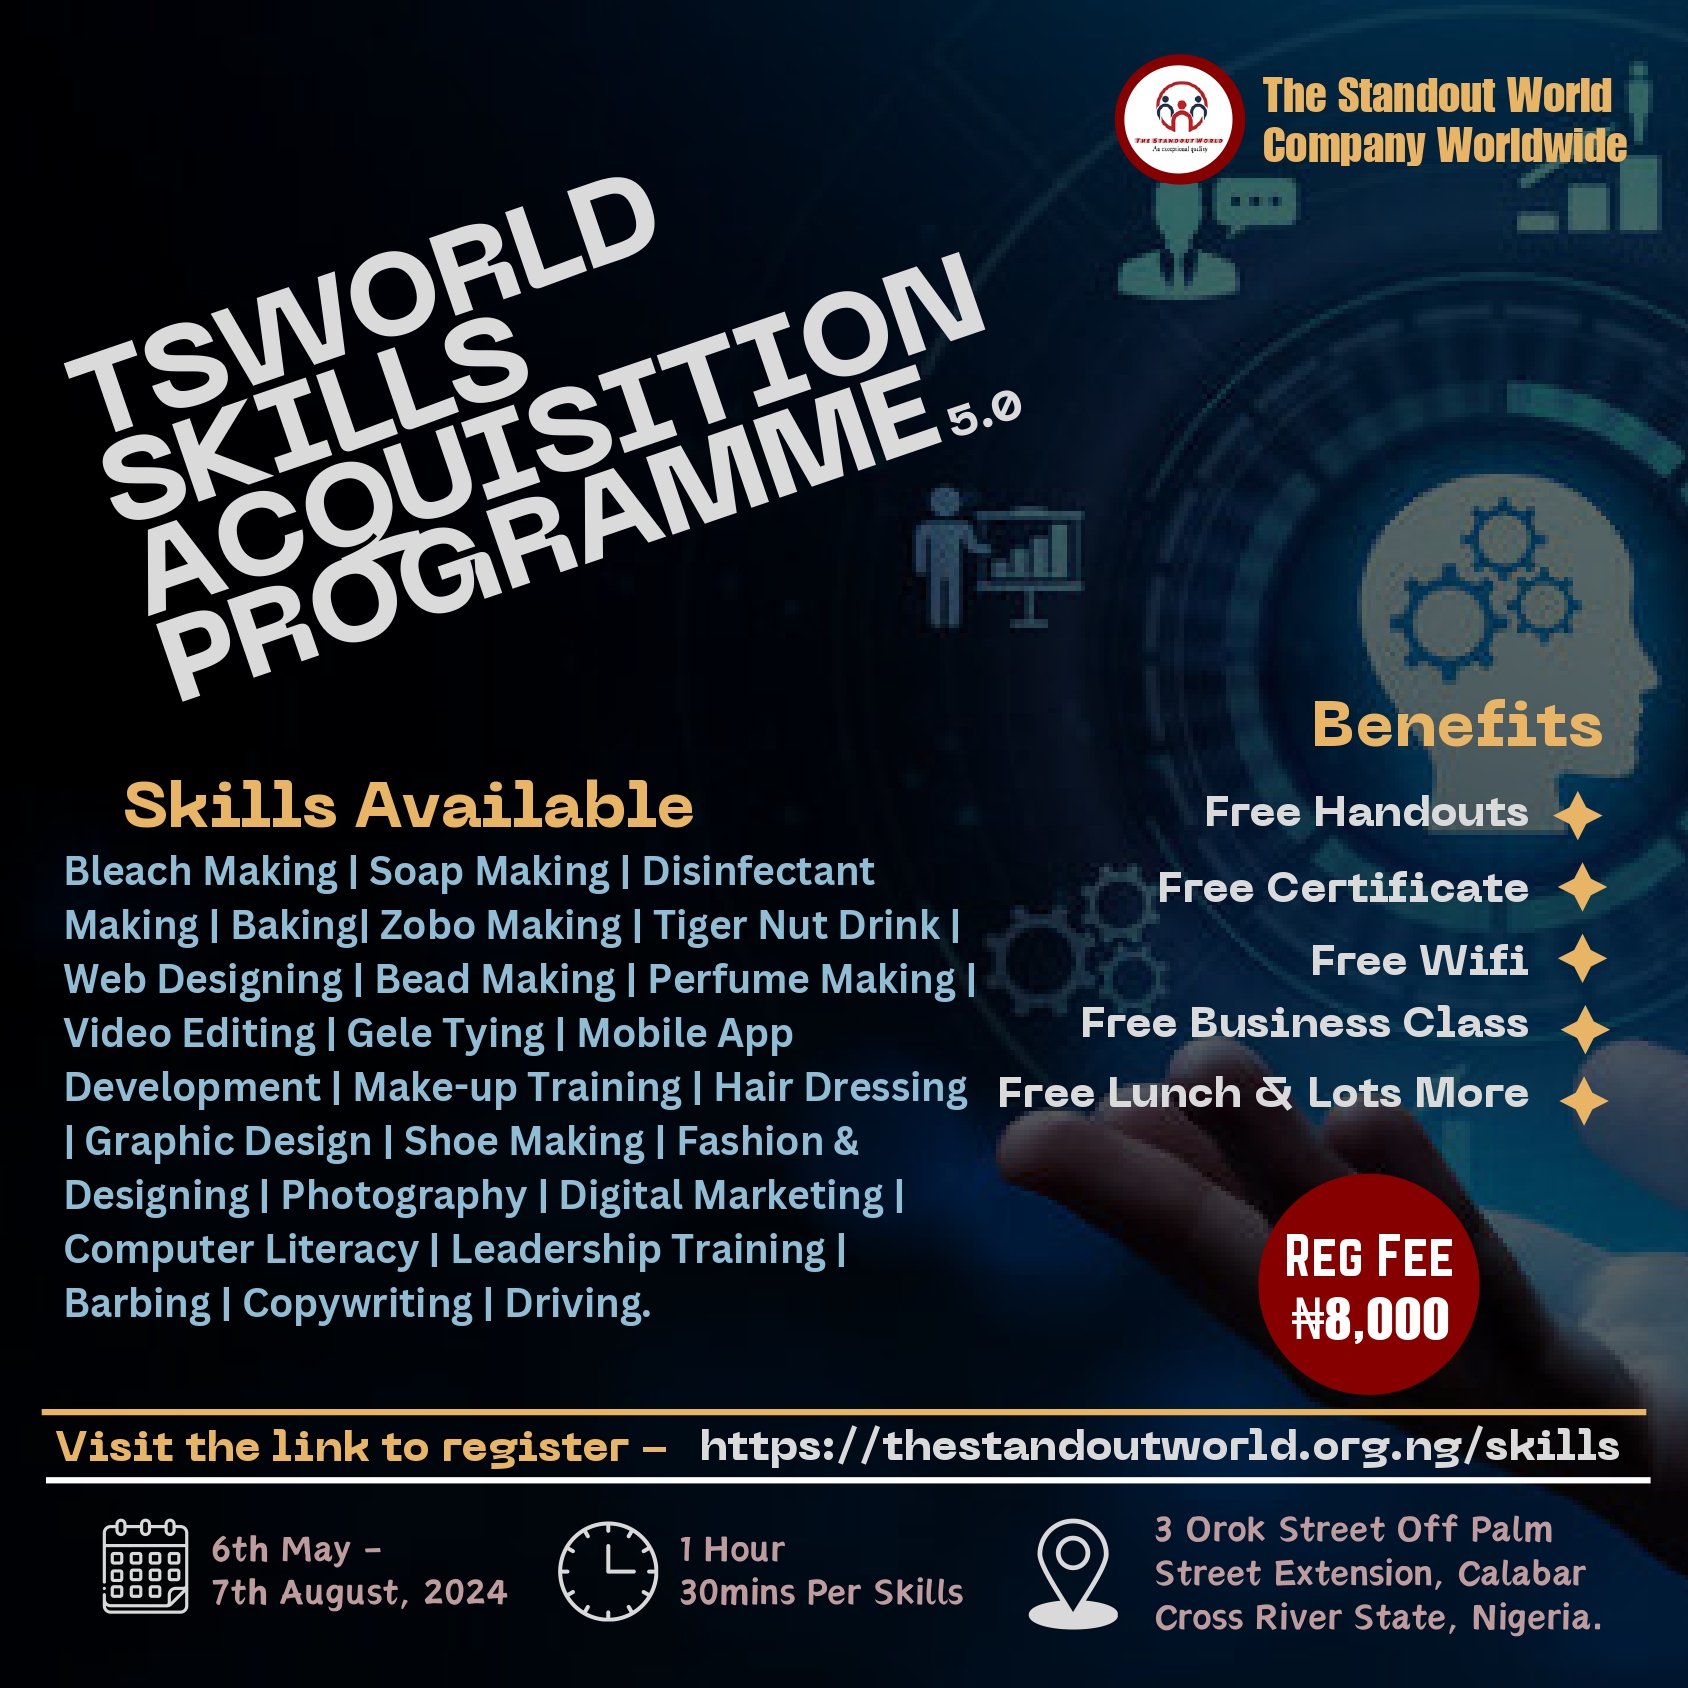 Our 5th Edition of our Annual Skills Acquisition Programme